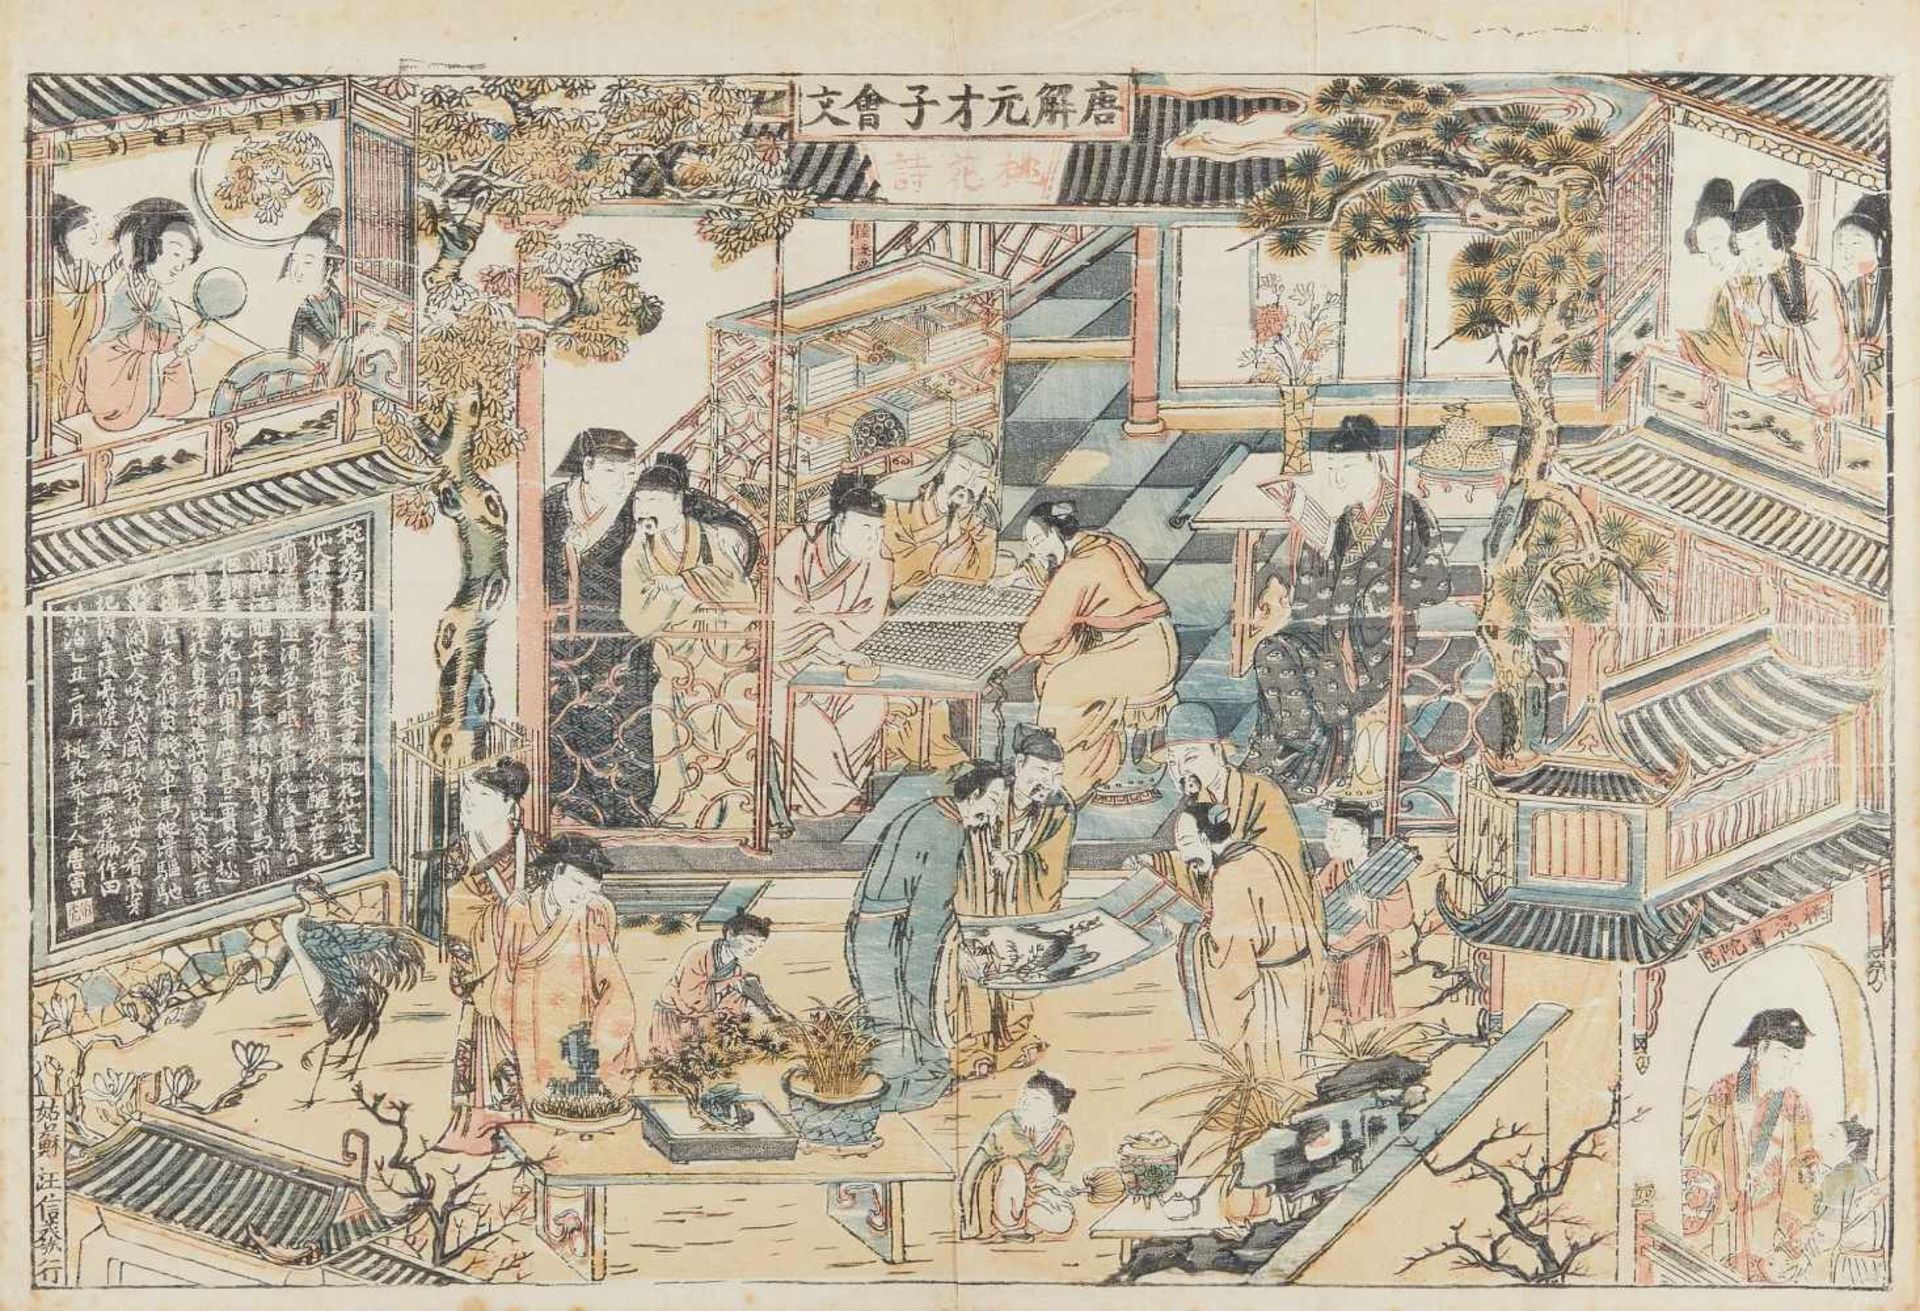 GATHERING IN THE PLUM BLOSSOM STUDIO. China. Qing dynasty. 17th/18th c. Title: Meeting of the